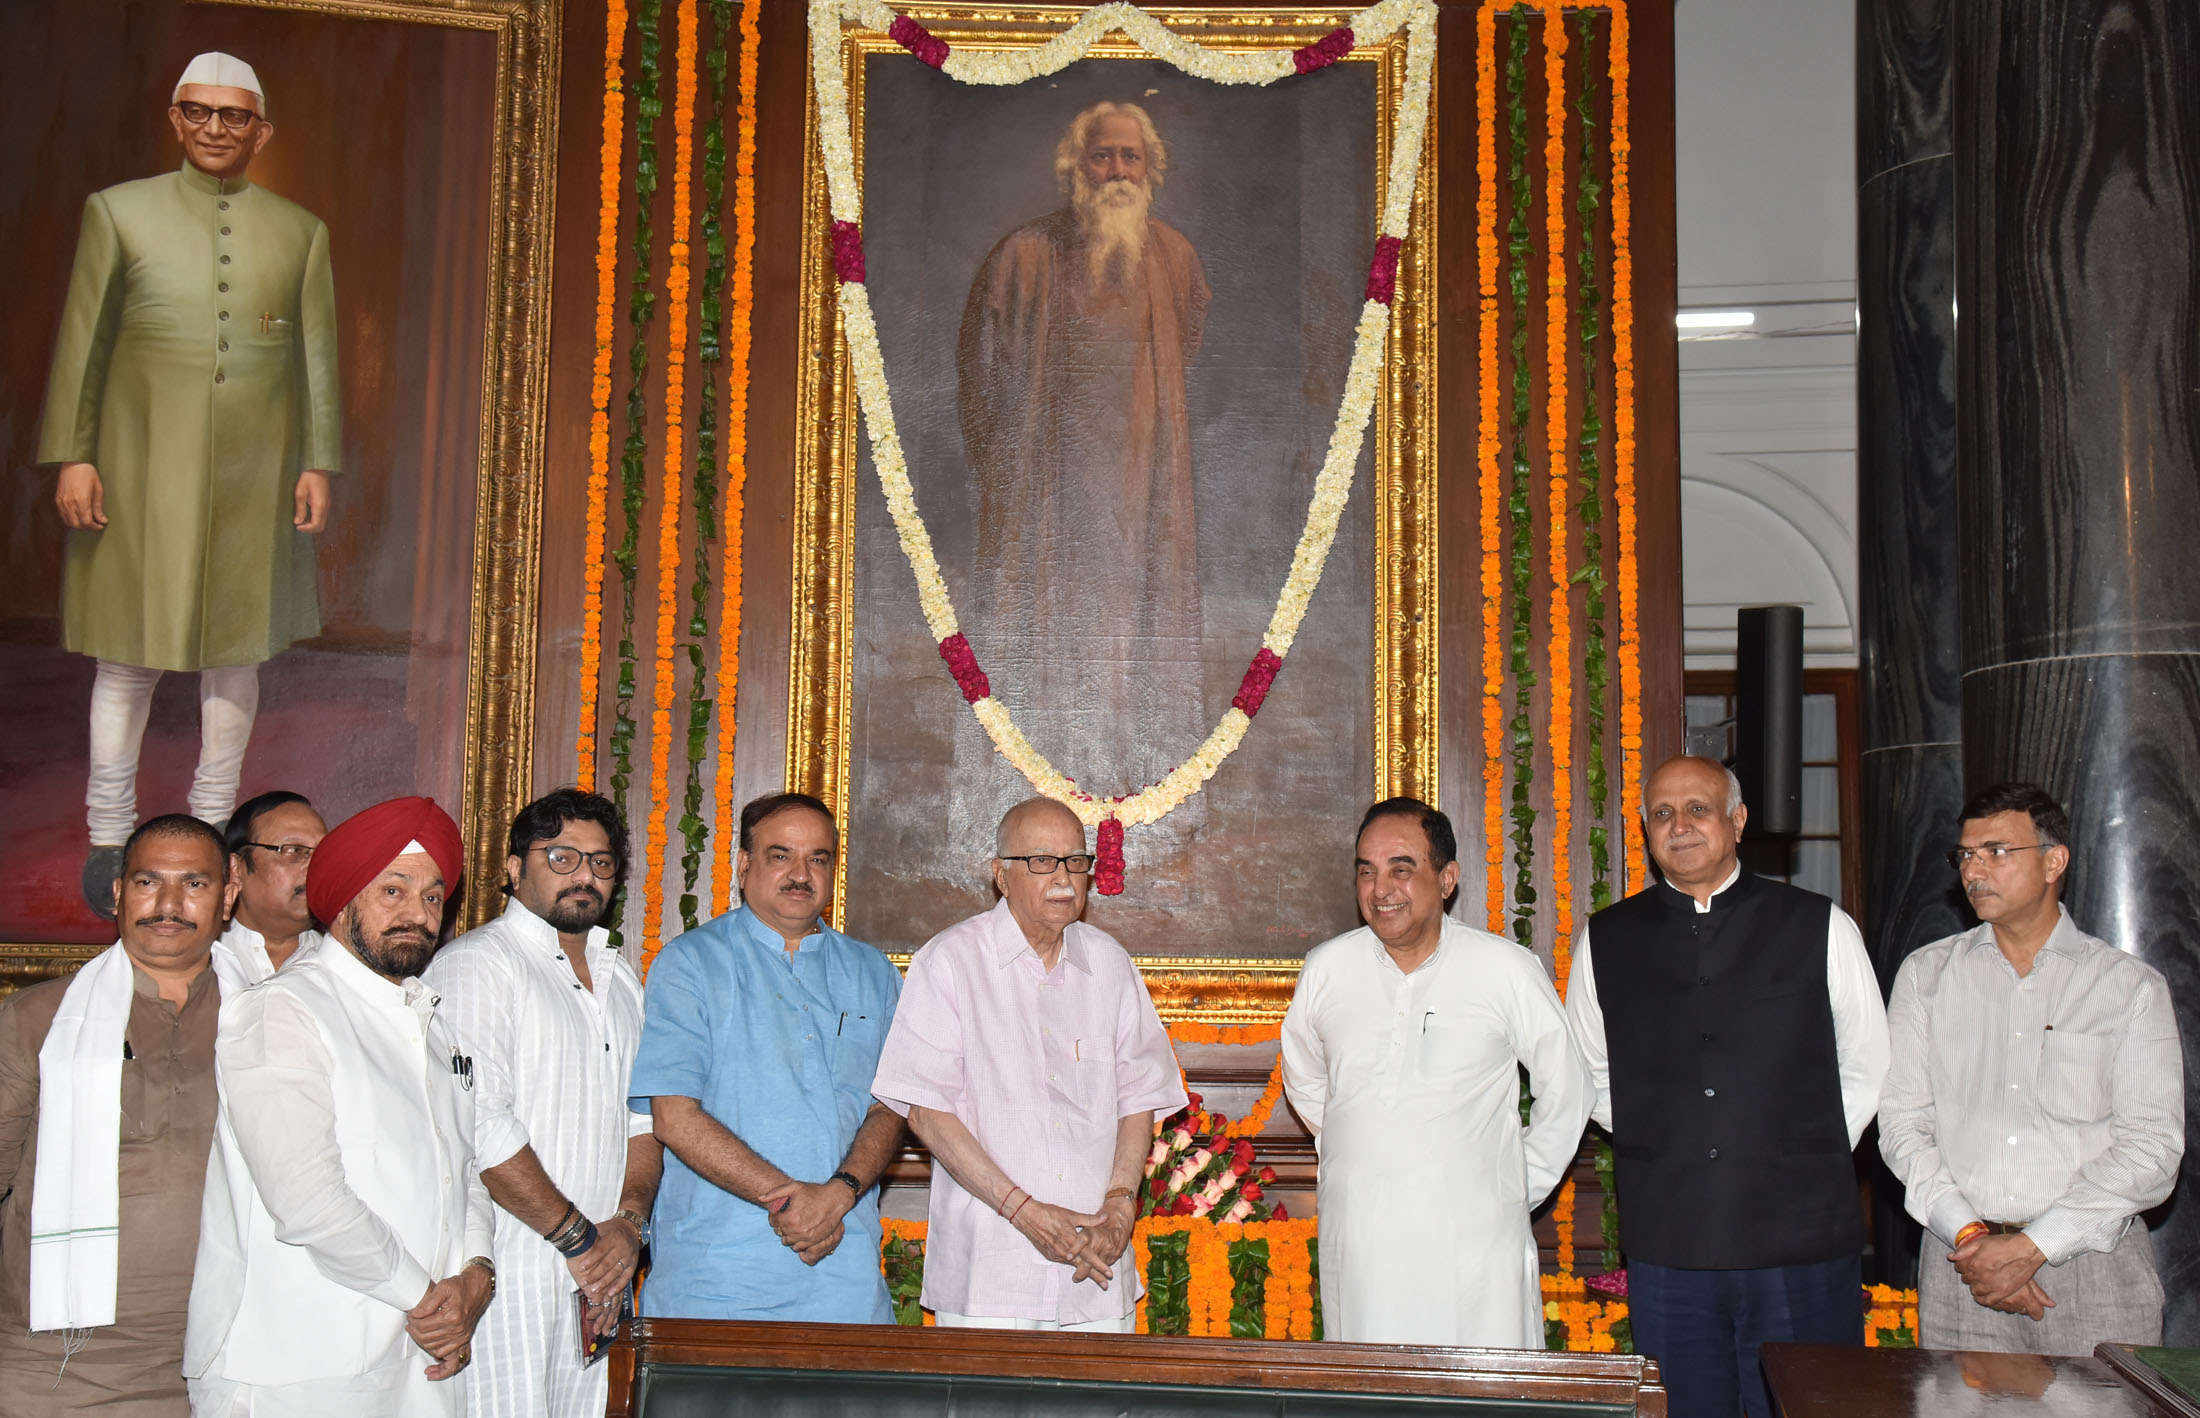 The Union Minister for Chemicals & Fertilizers and Parliamentary Affairs, Shri Ananth Kumar, the Minister of State for Heavy Industries & Public Enterprises, Shri Babul Supriyo and other dignitaries paid tributes at the portrait of Gurudev Rabindranath Tagore, on his Birth Anniversary, at Parliament House, in New Delhi on May 09, 2017,